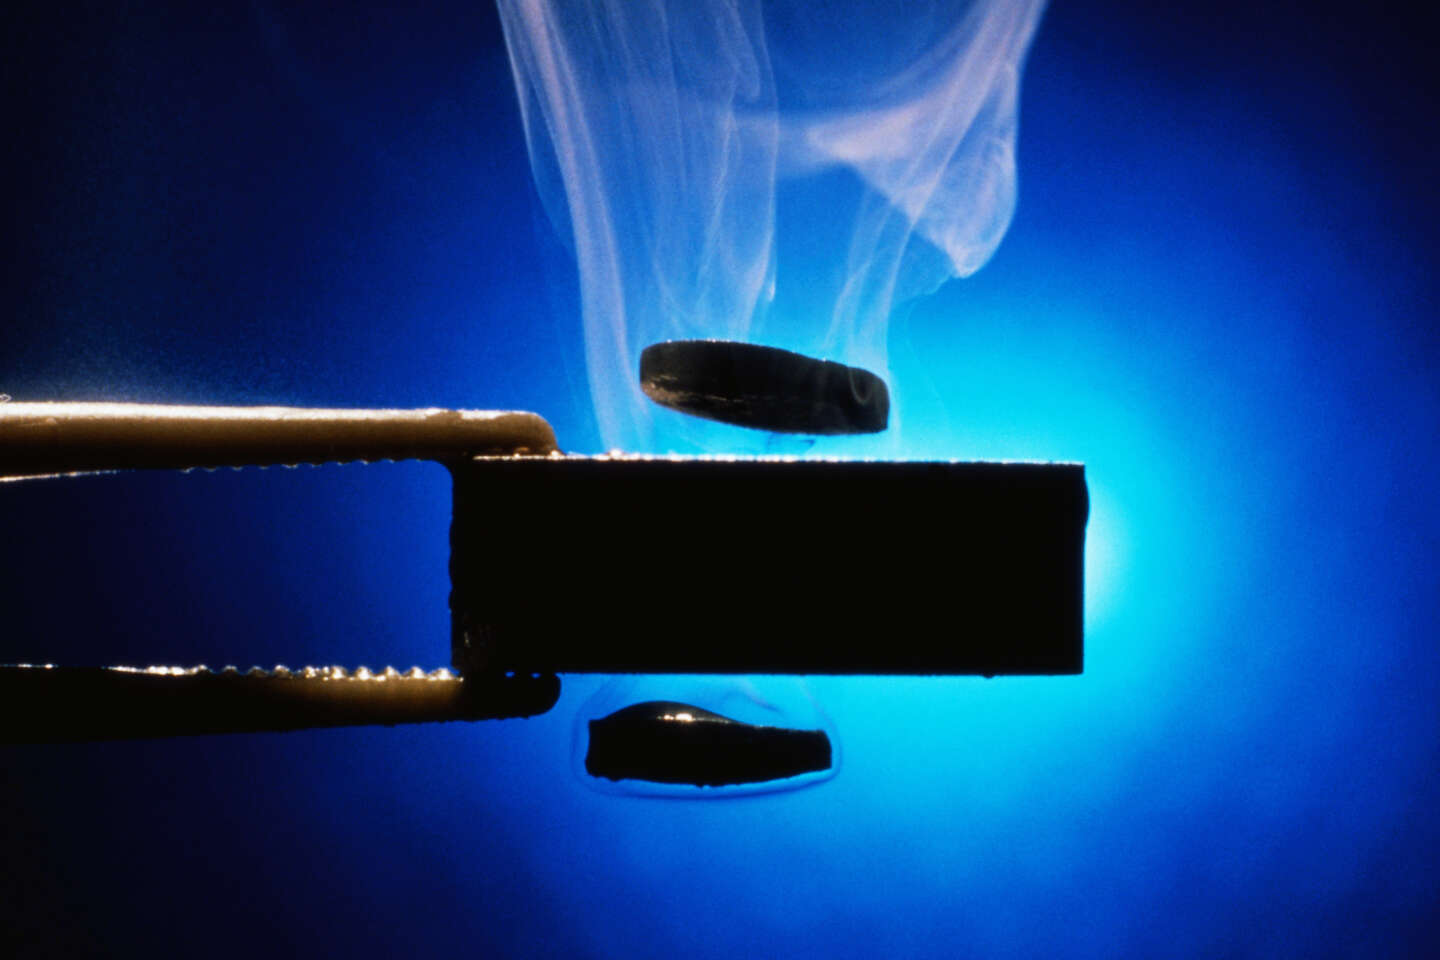 A high-temperature superconductor warmly welcomed